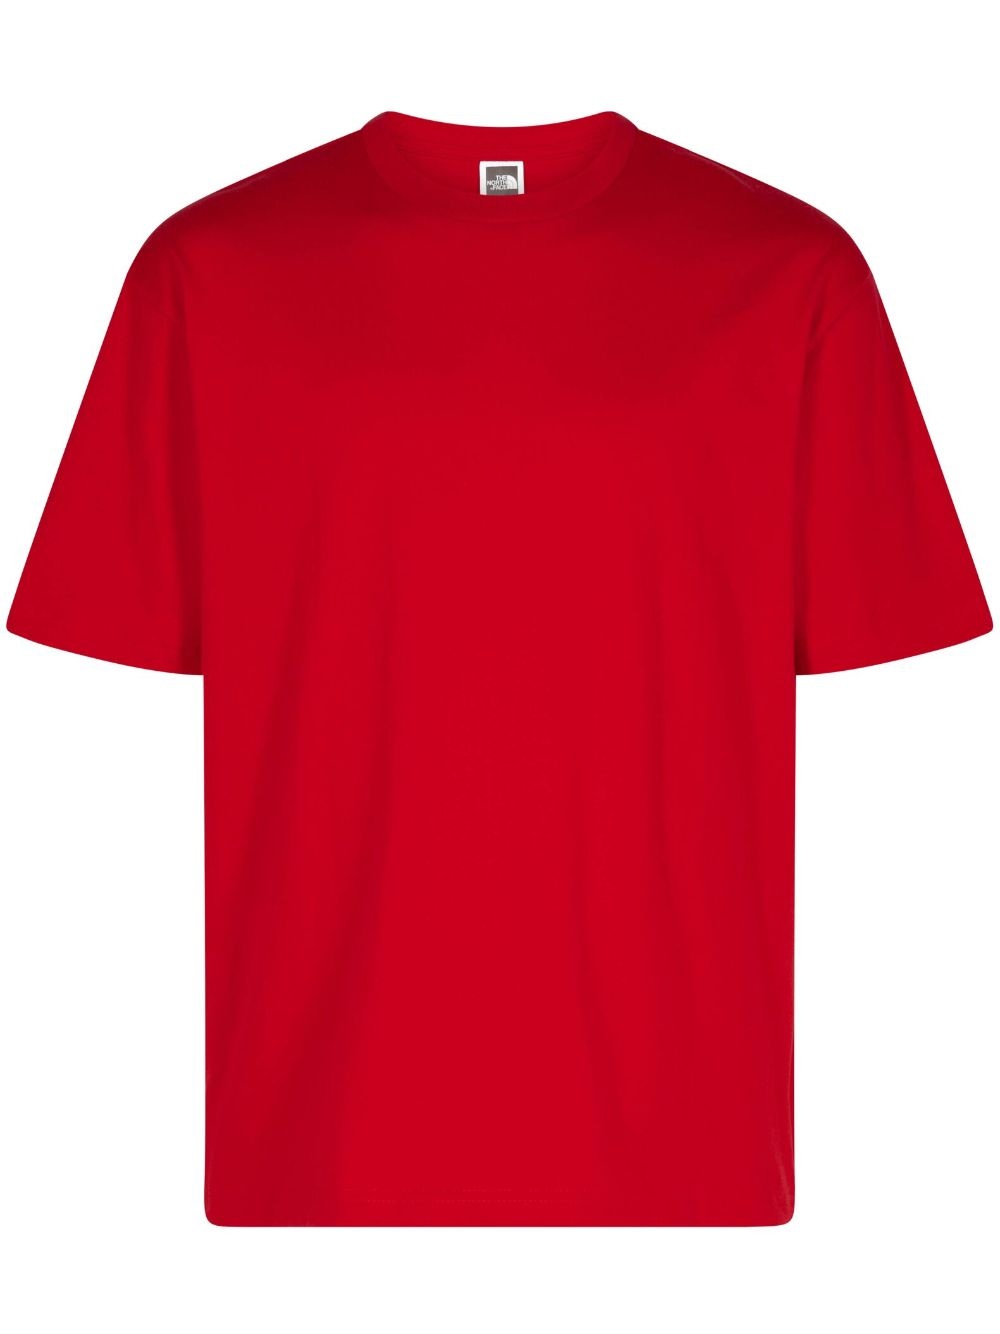 x The North Face "Red" T-shirt - 1